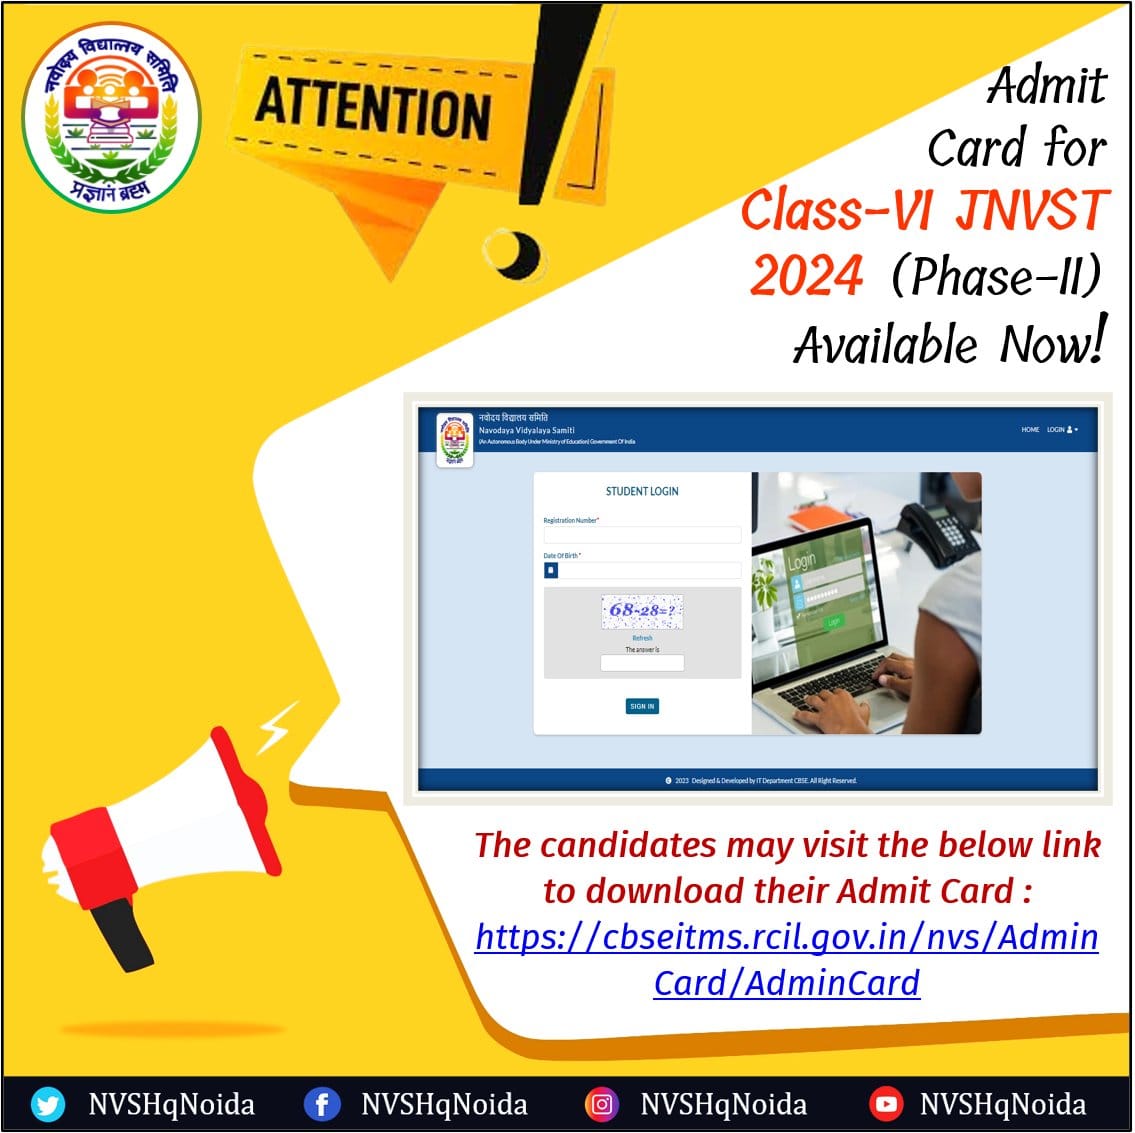 Download the Admit Card for class VI